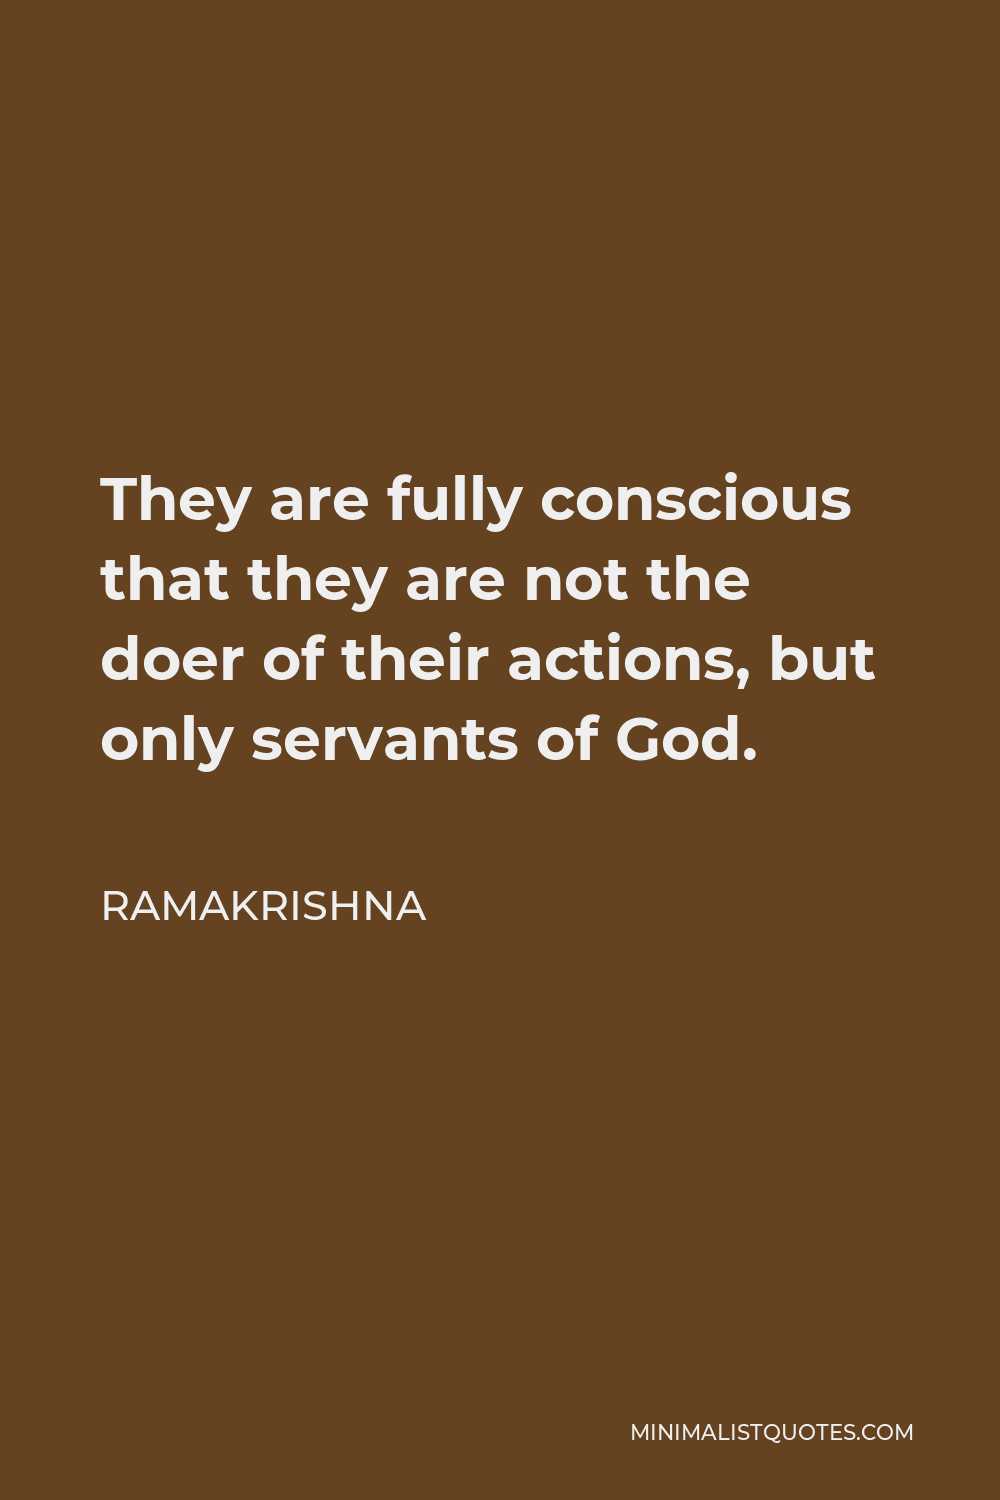 Ramakrishna Quote - They are fully conscious that they are not the doer of their actions, but only servants of God.